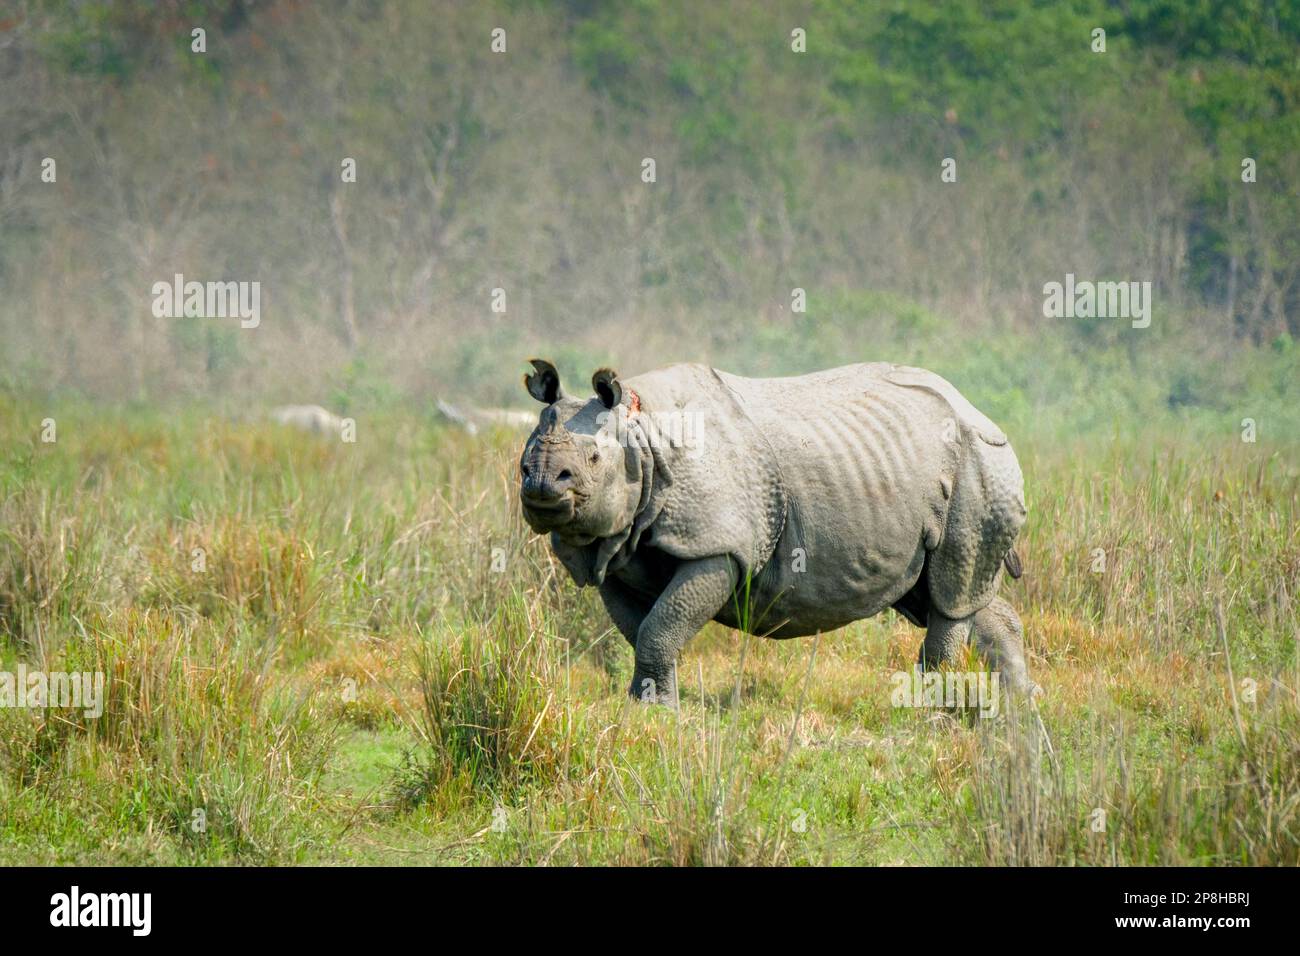 Great Indian Rhino, Rhinoceros unicornis, stands proudly in grassland cautious observing for tigers. Kaziranga National Park, Assam, India Stock Photo